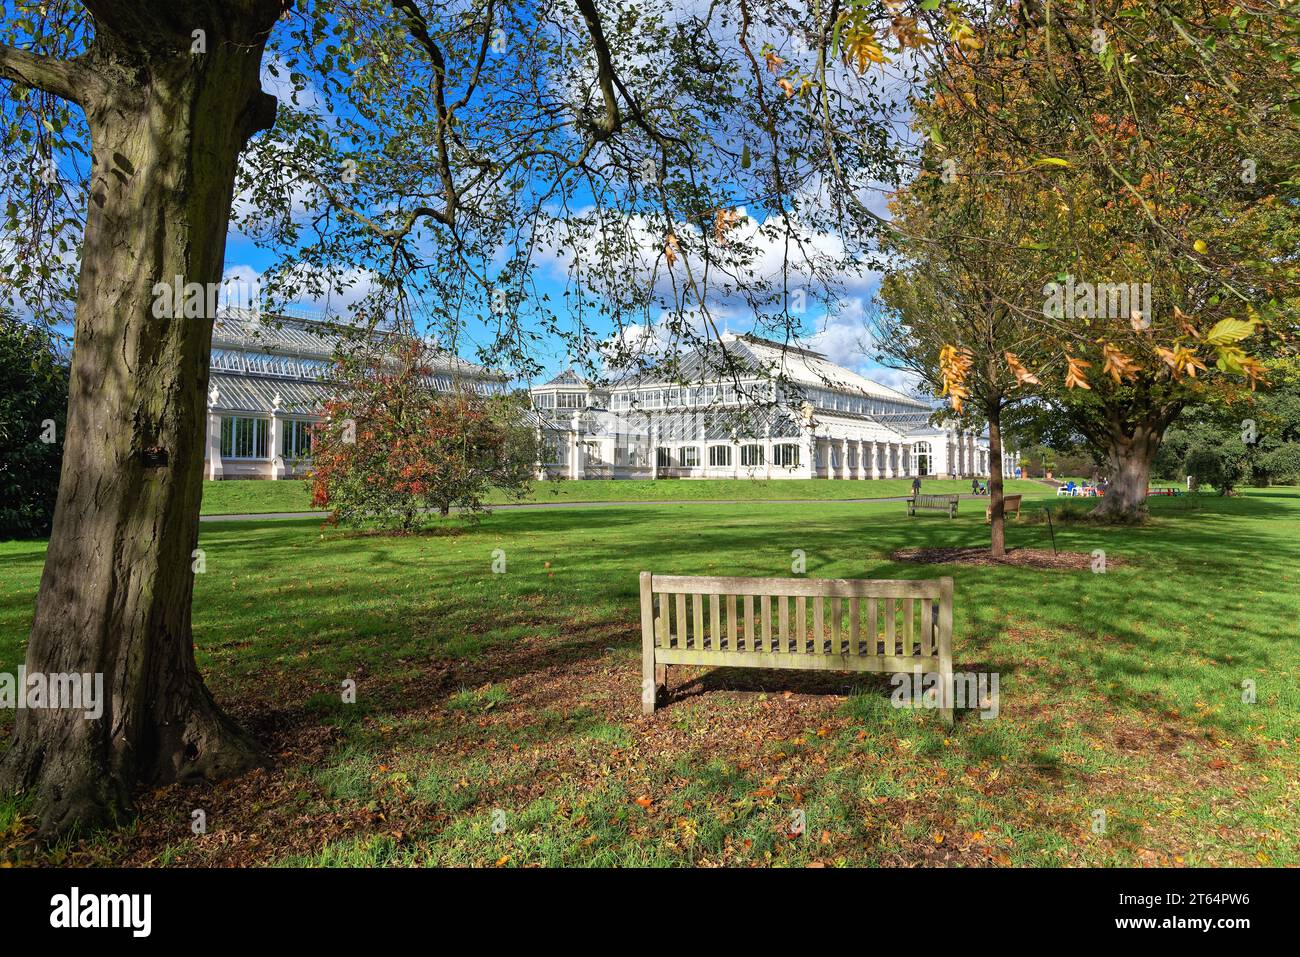 Exterior of the Temperate House in the Royal Botanic Gardens Kew on a sunny autumnal day, West London England UK Stock Photo